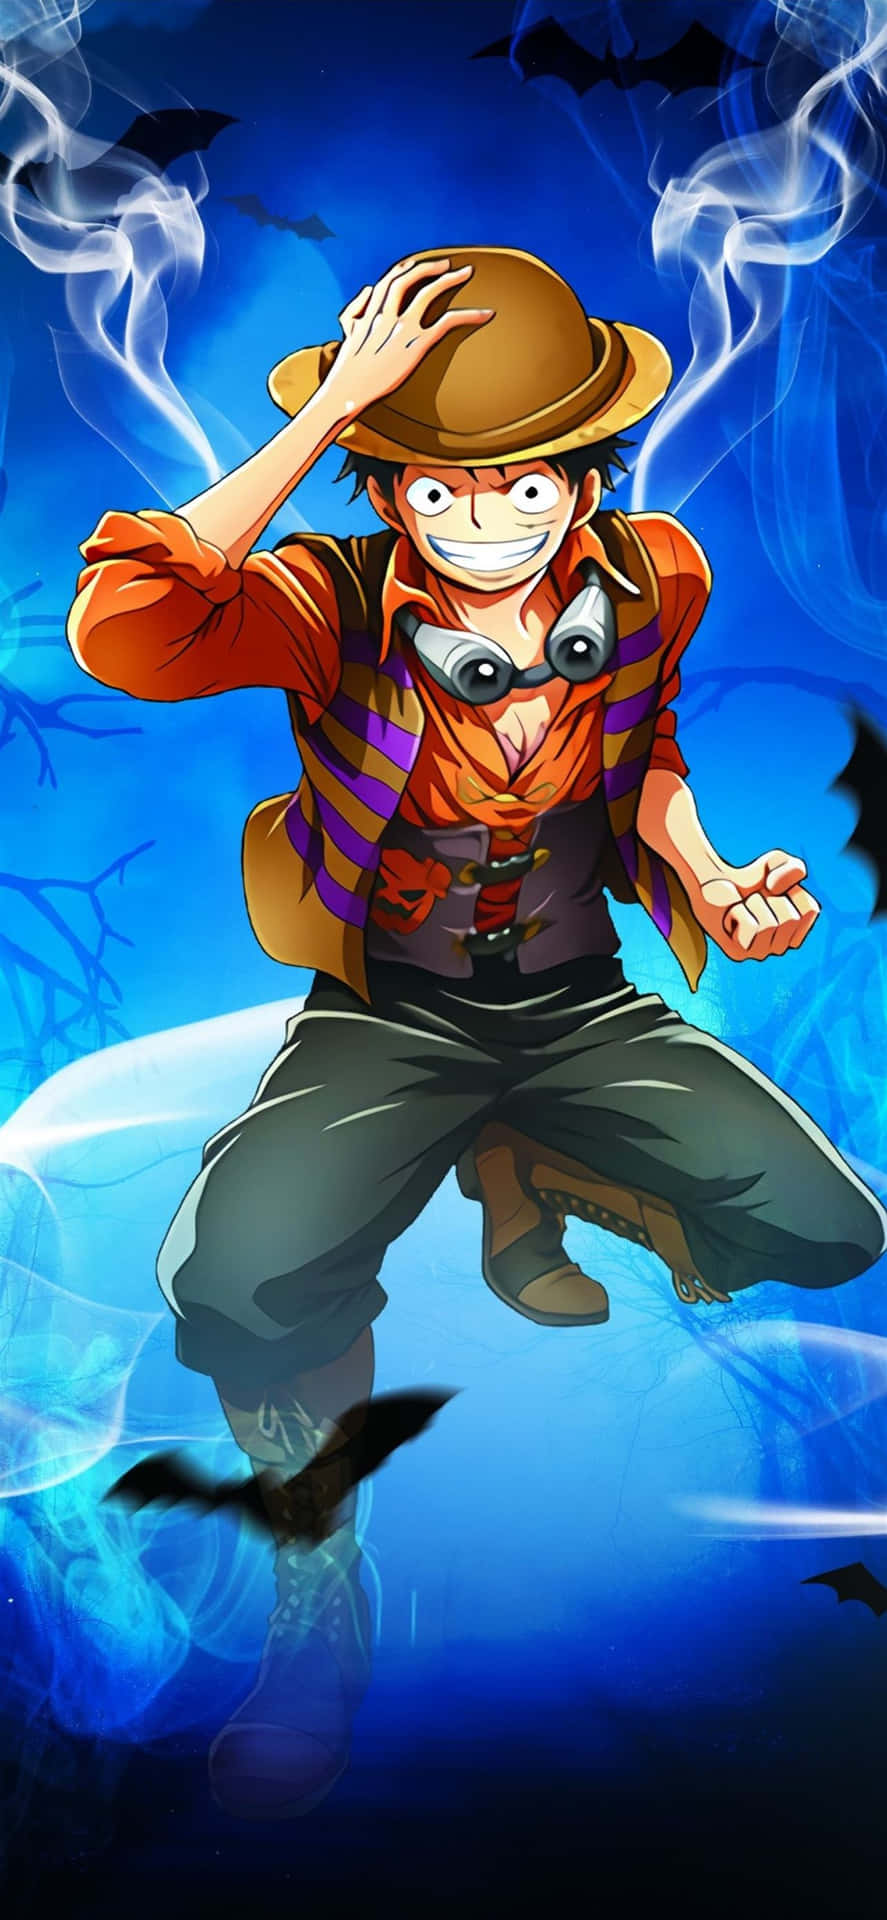 Luffy - On an Adventure to Take Over the Grand Line